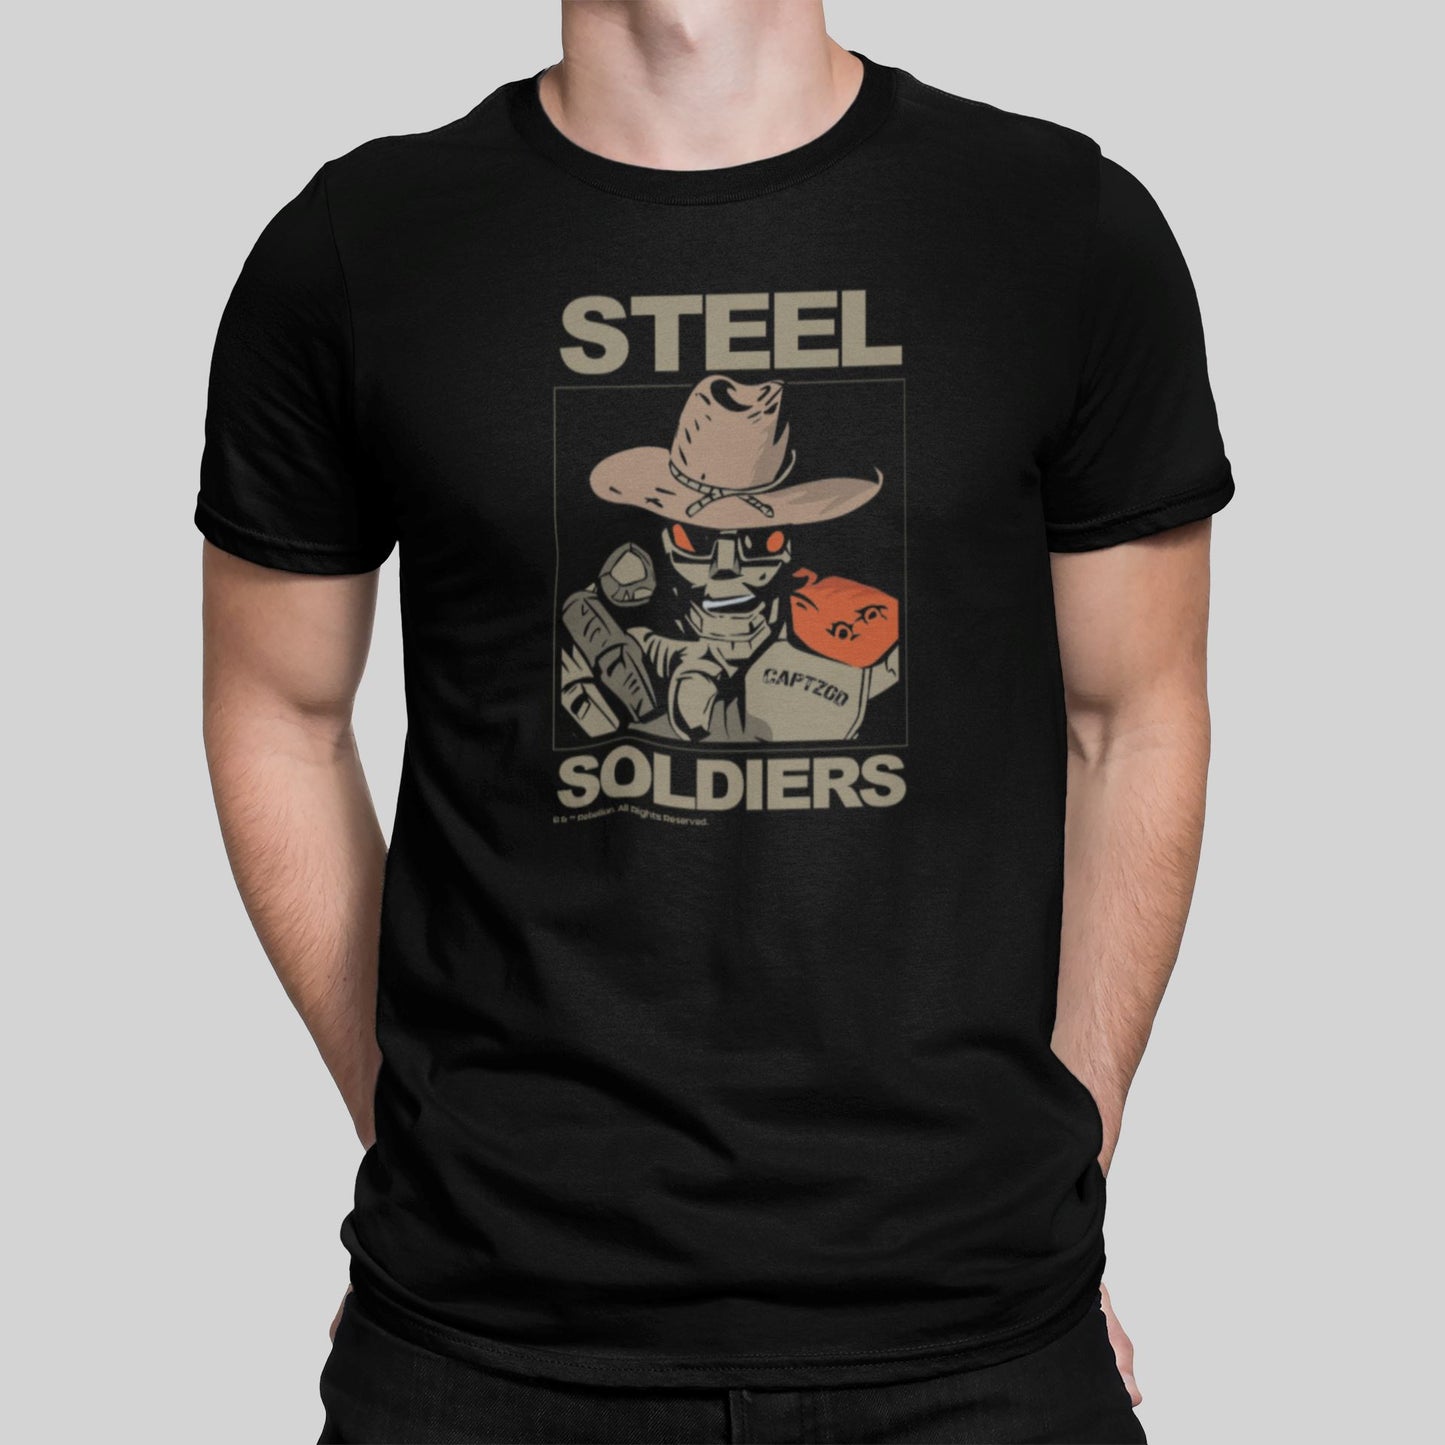 Z: Steel Soldiers Retro Gaming T-Shirt T-Shirt Seven Squared Small 34-36" Black 